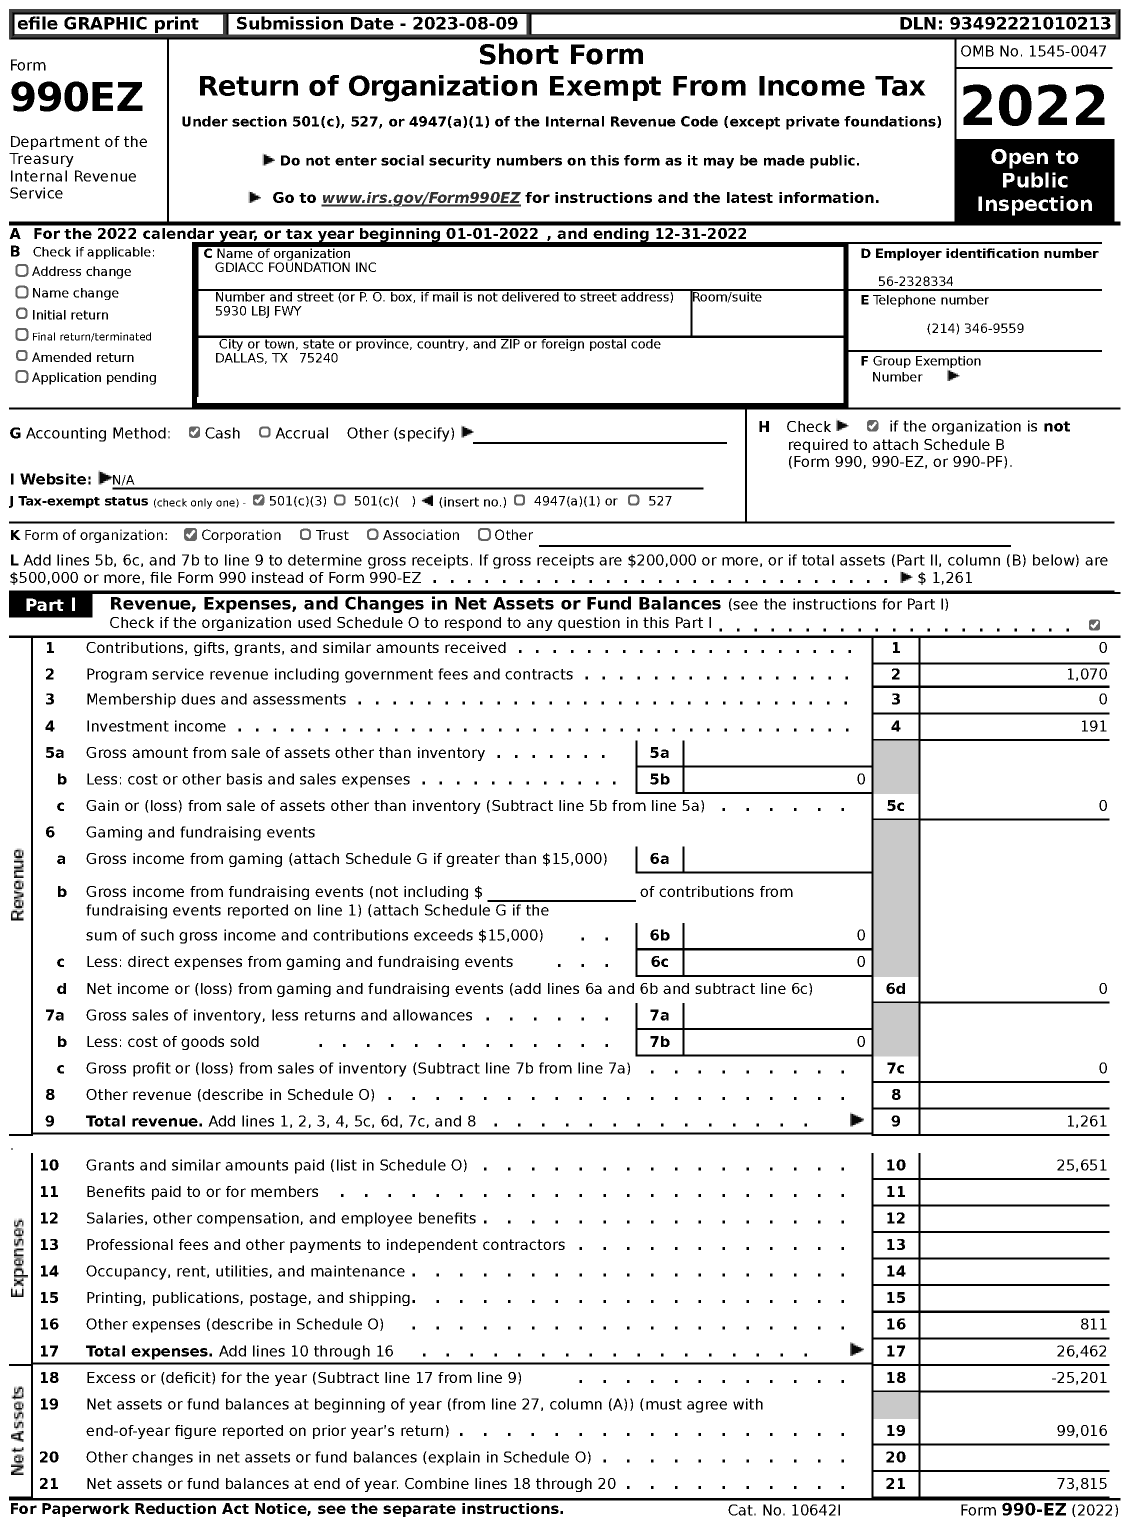 Image of first page of 2022 Form 990EZ for Gdiacc Foundation